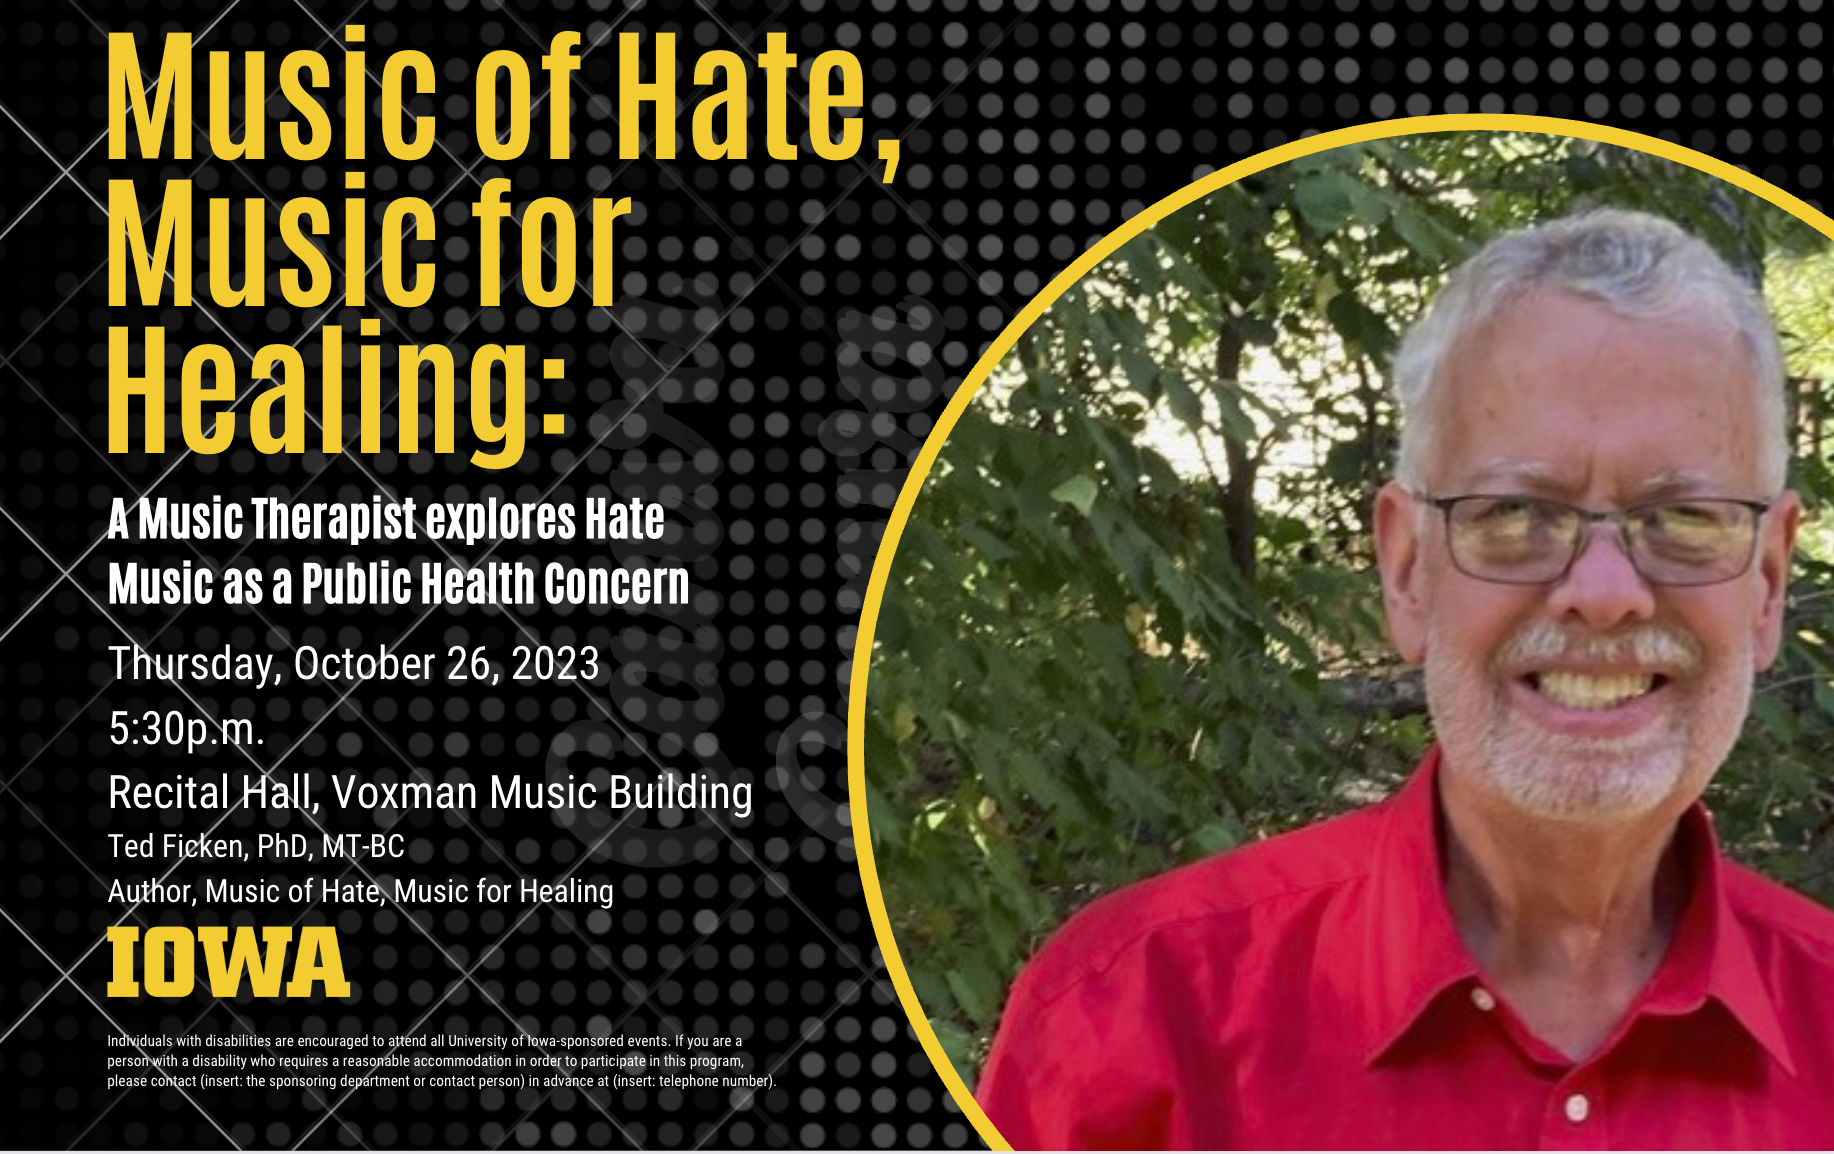 Music of Hate, Music for Healing presentation on October 26